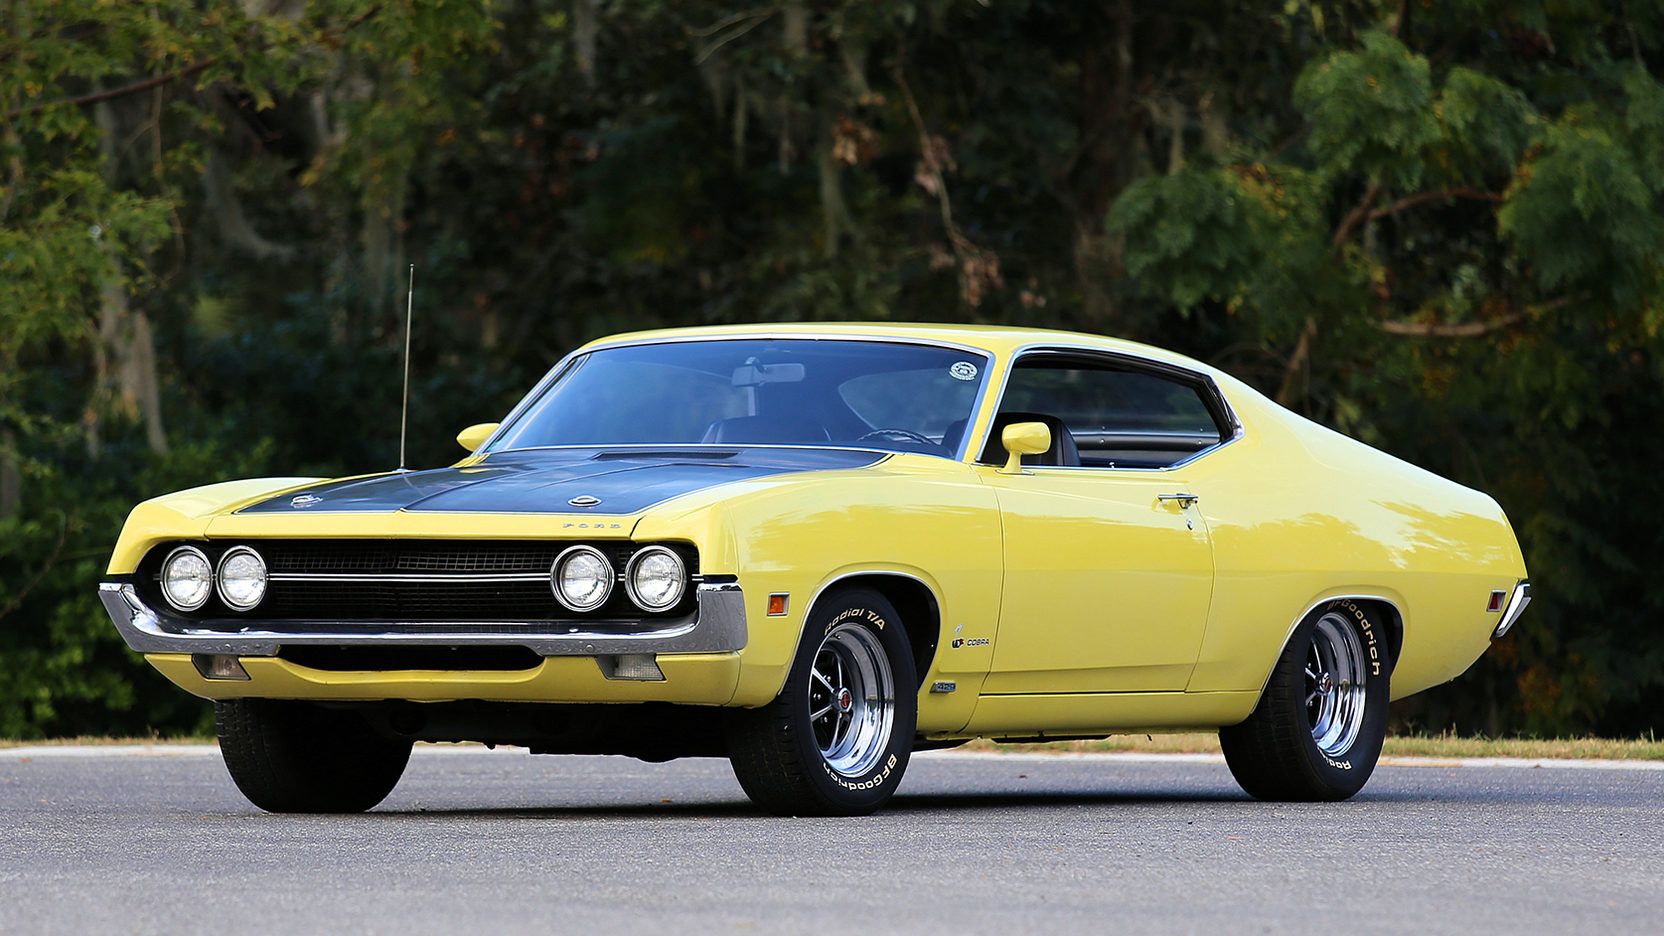 A yellow 1970 Ford Torino Cobra on the road